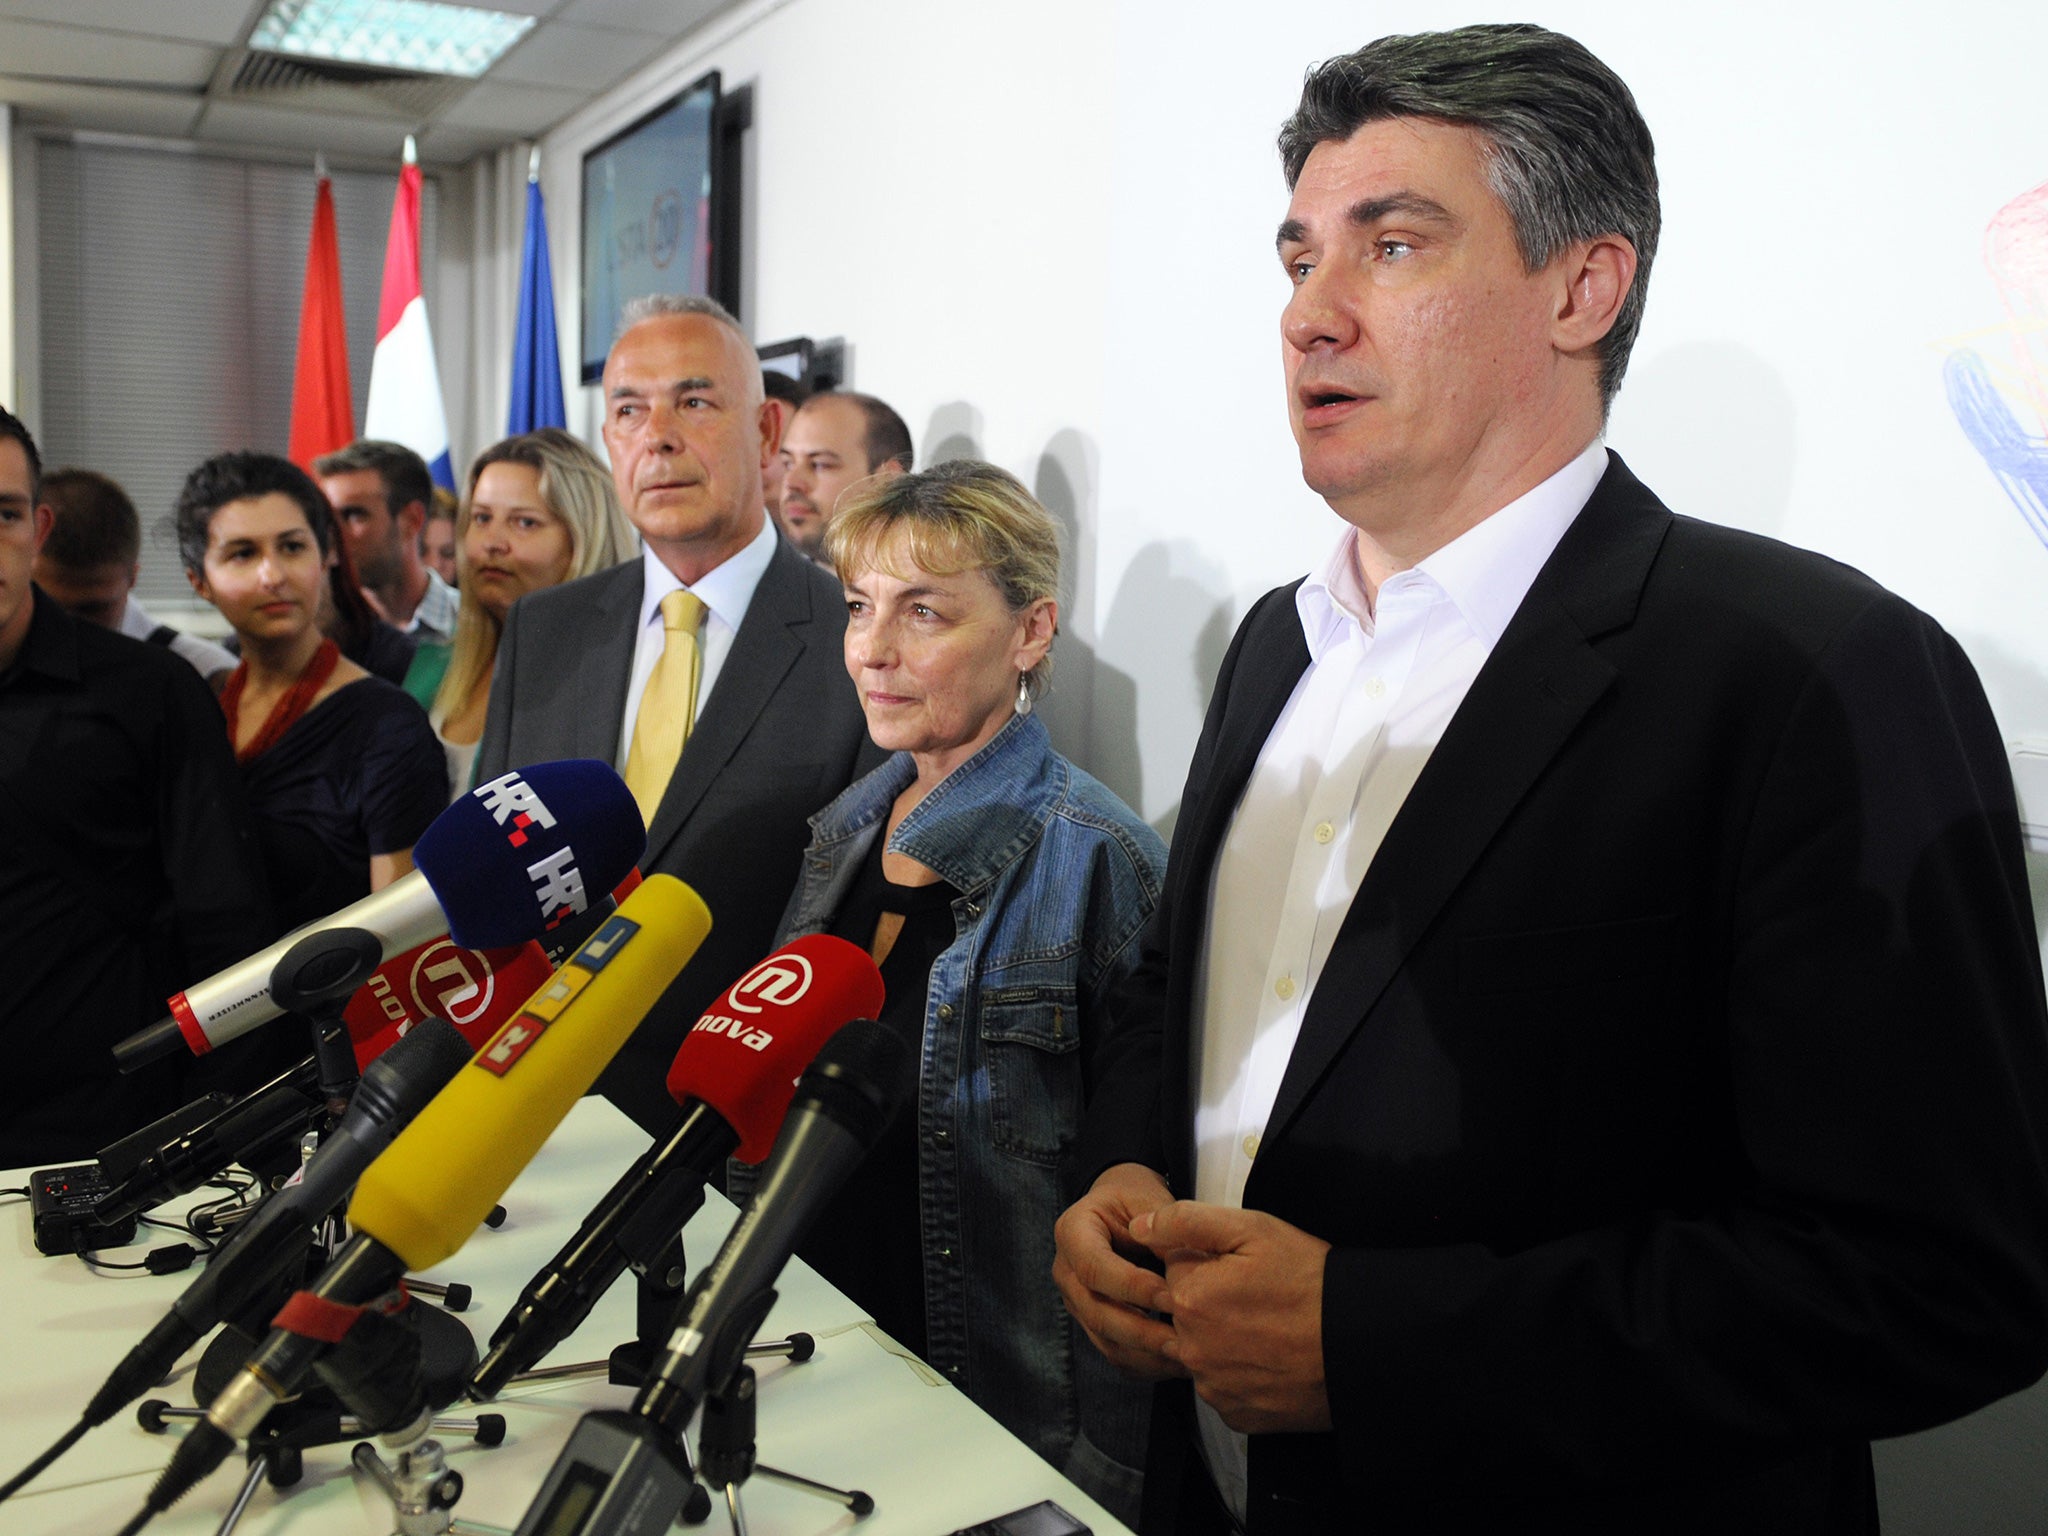 Croatian Prime Minister Zoran Milanovic has convinced multiple cities, public and private companies of the benefits of the scheme